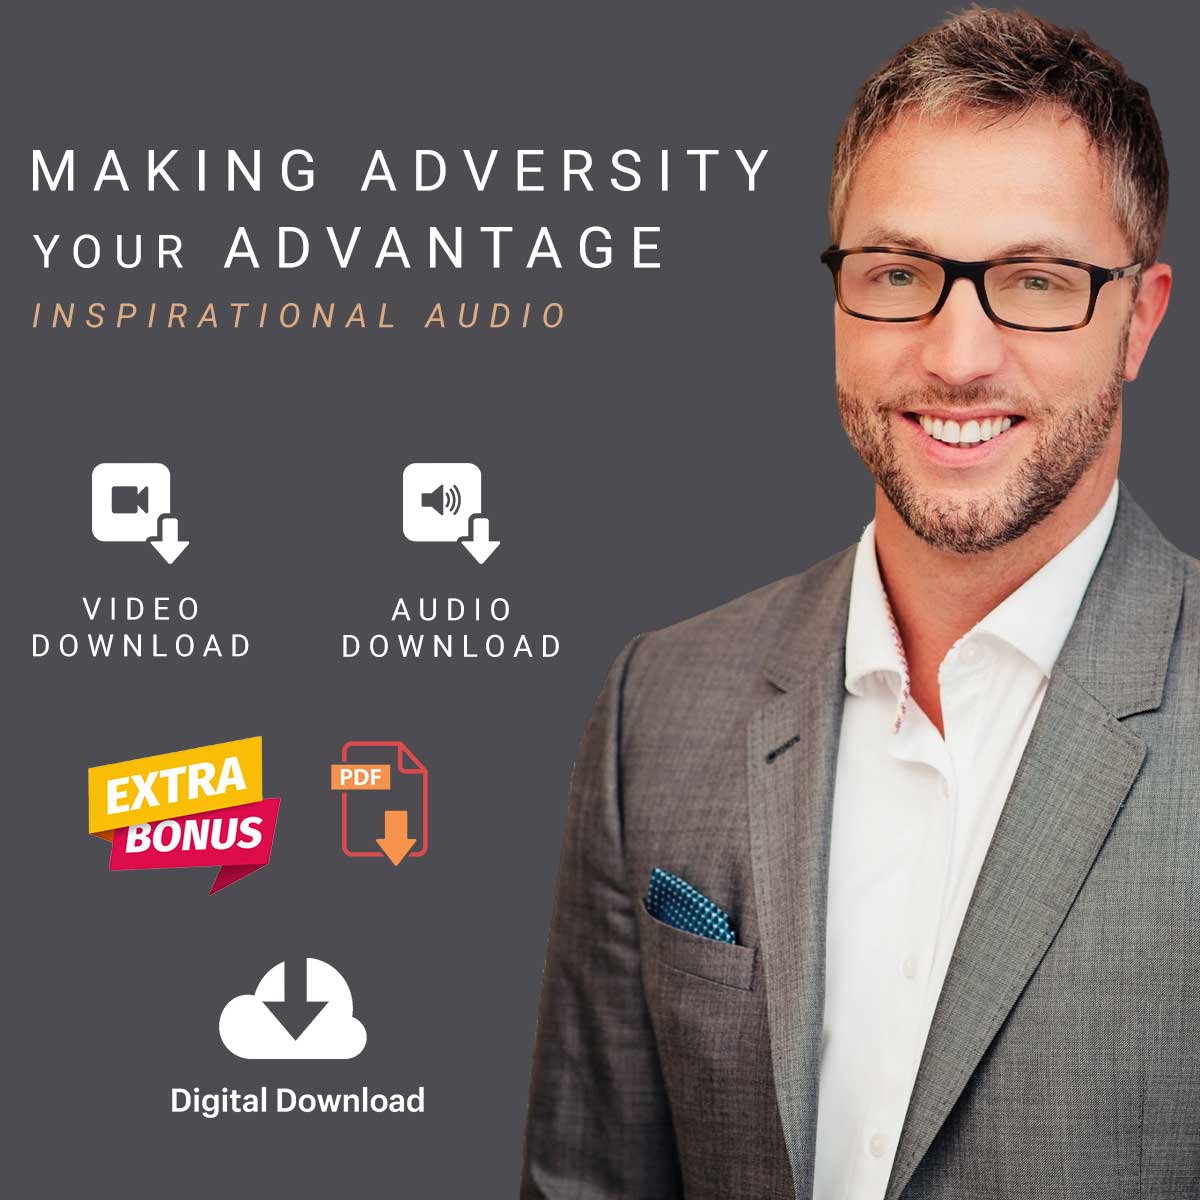 Making Adversity Your Advantage (Inspirational Audio from Todd Cetnar)